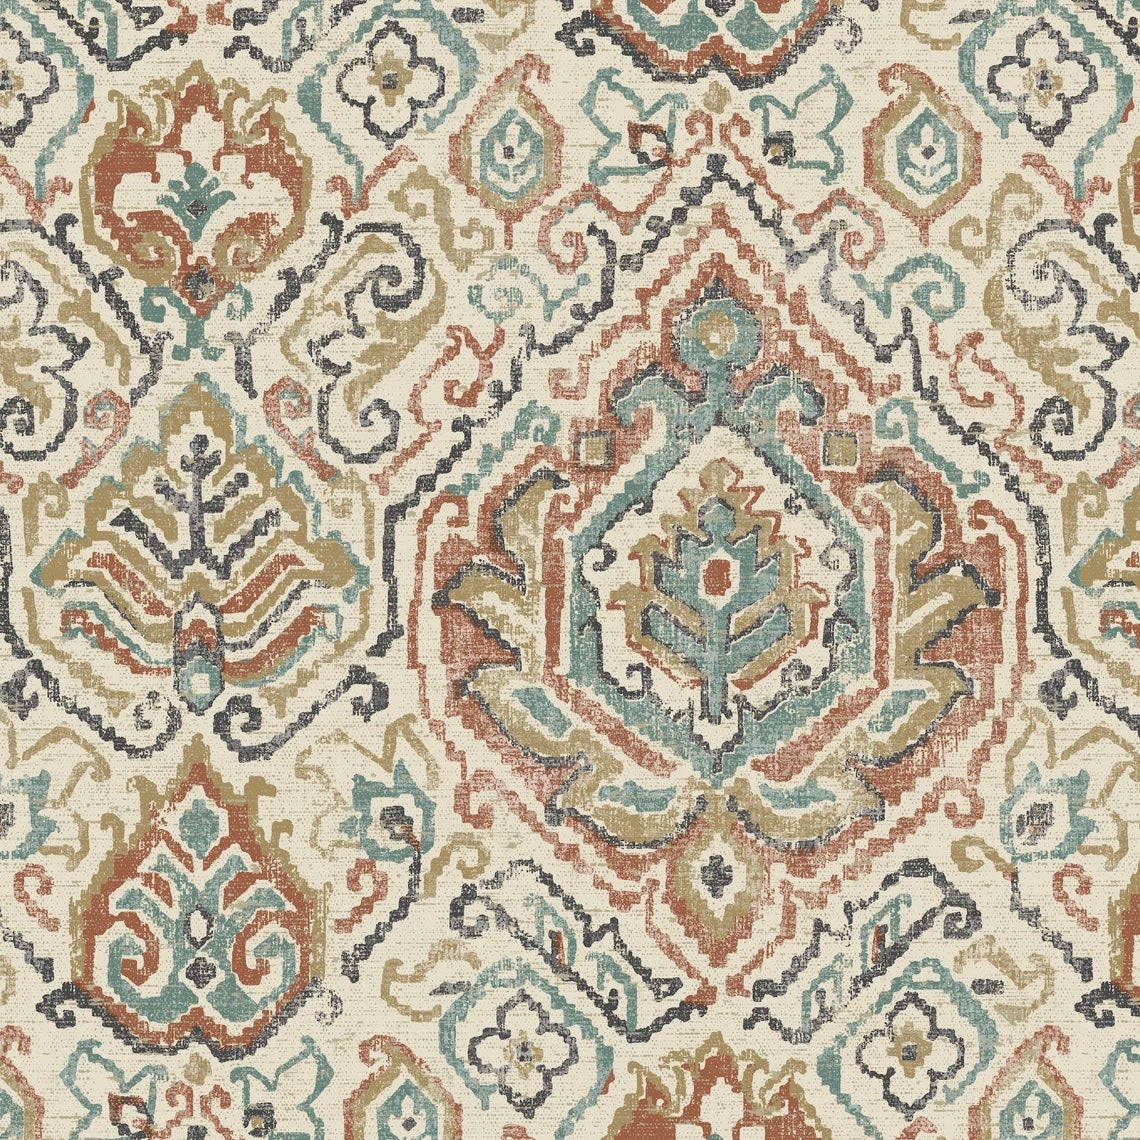 Pillow Sham in Cathell Clay Medallion Weathered Persian Rug Design- Large Scale